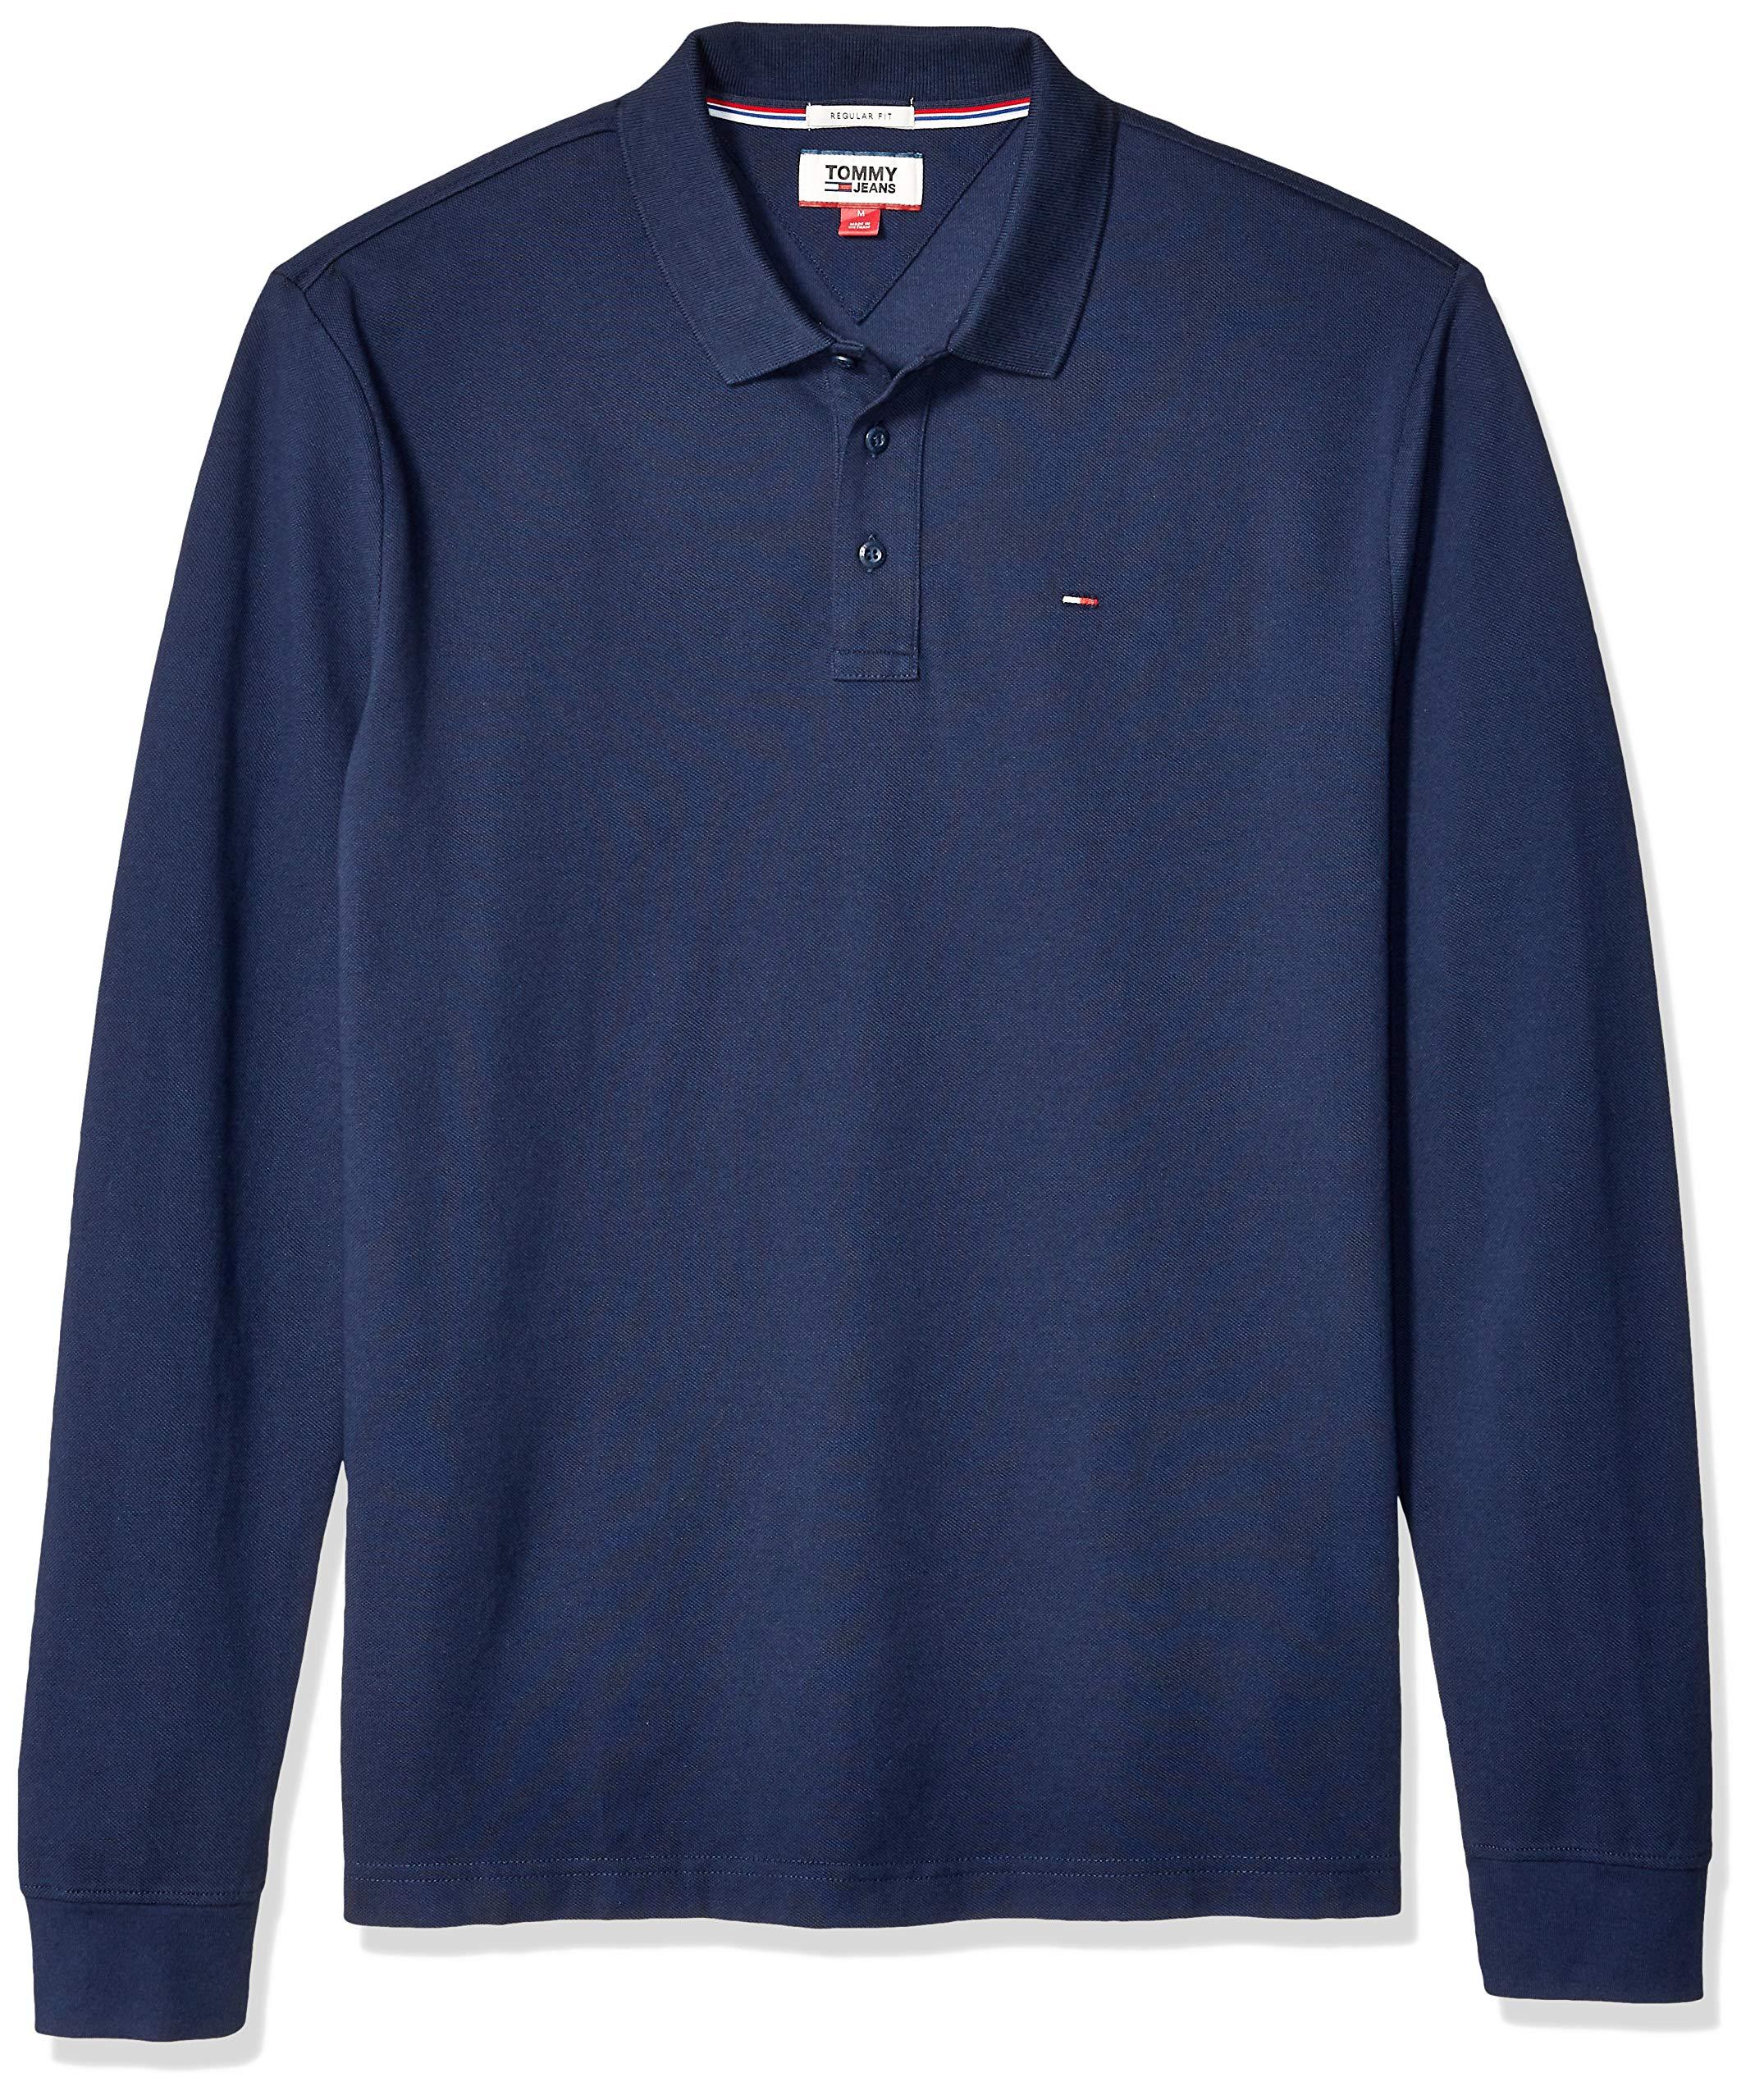 tommy polo long sleeve